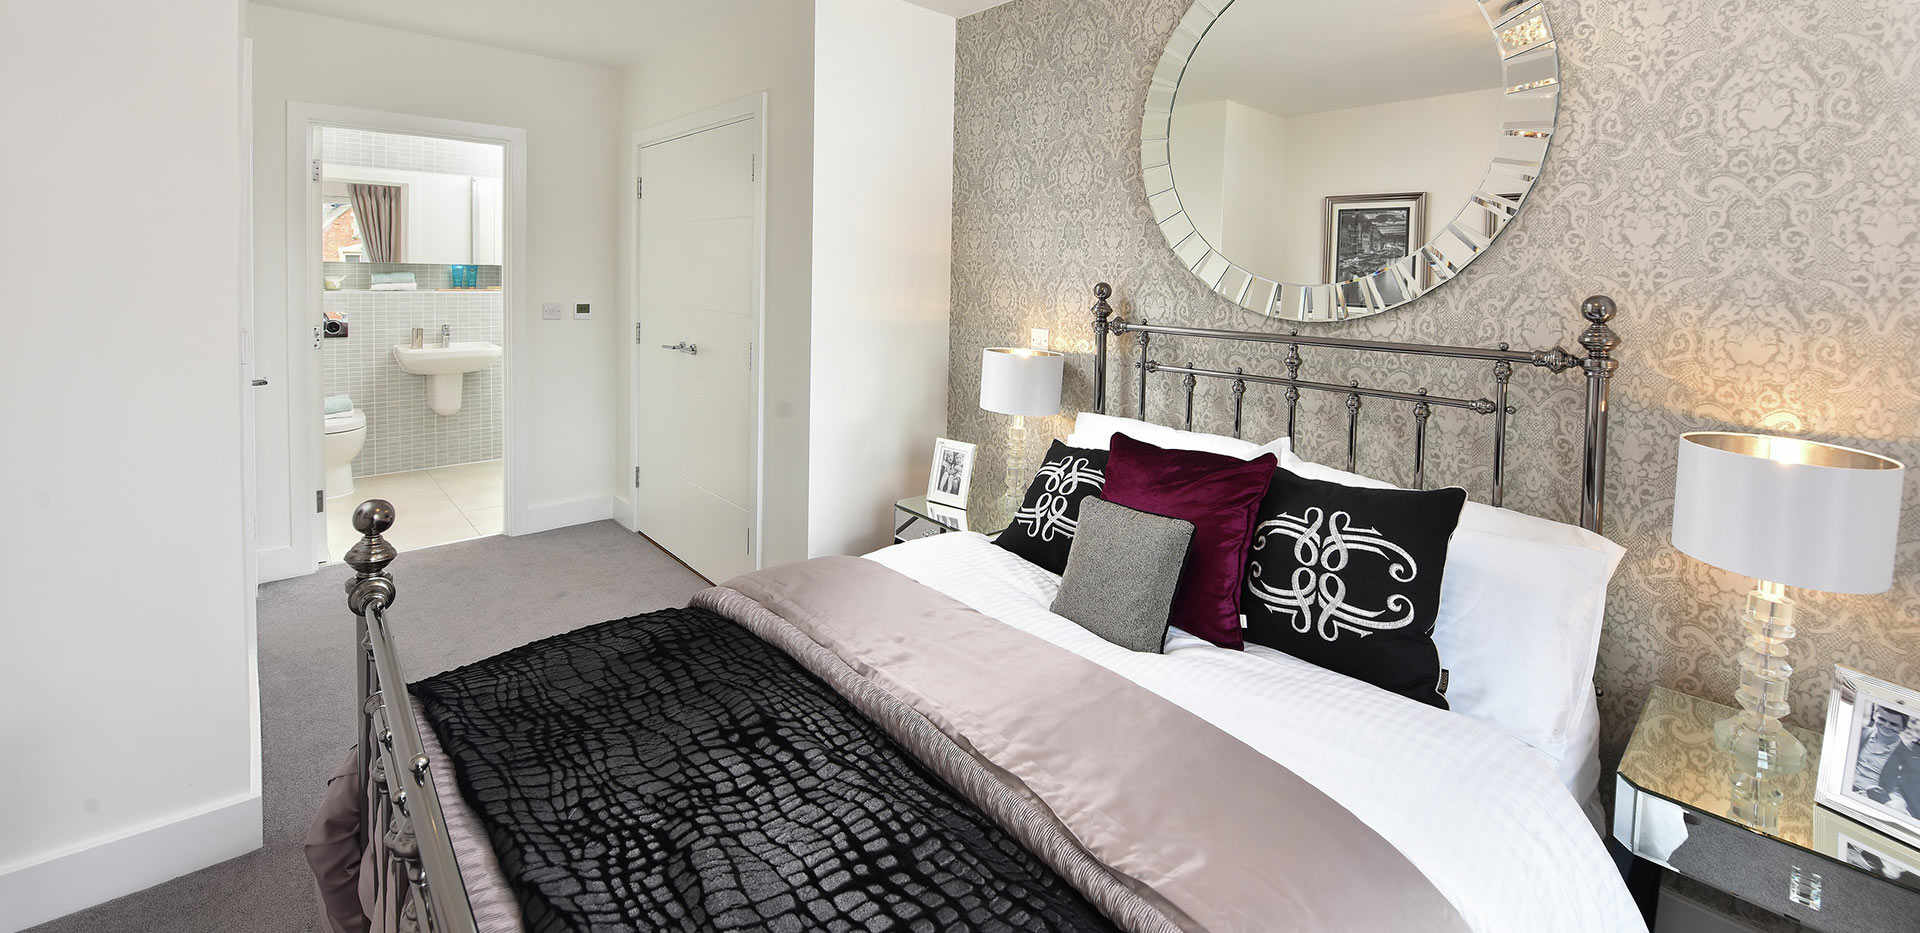 Berkeley, The Waterside at Royal Worcester, Previous Showhome Master Bedroom, Interior